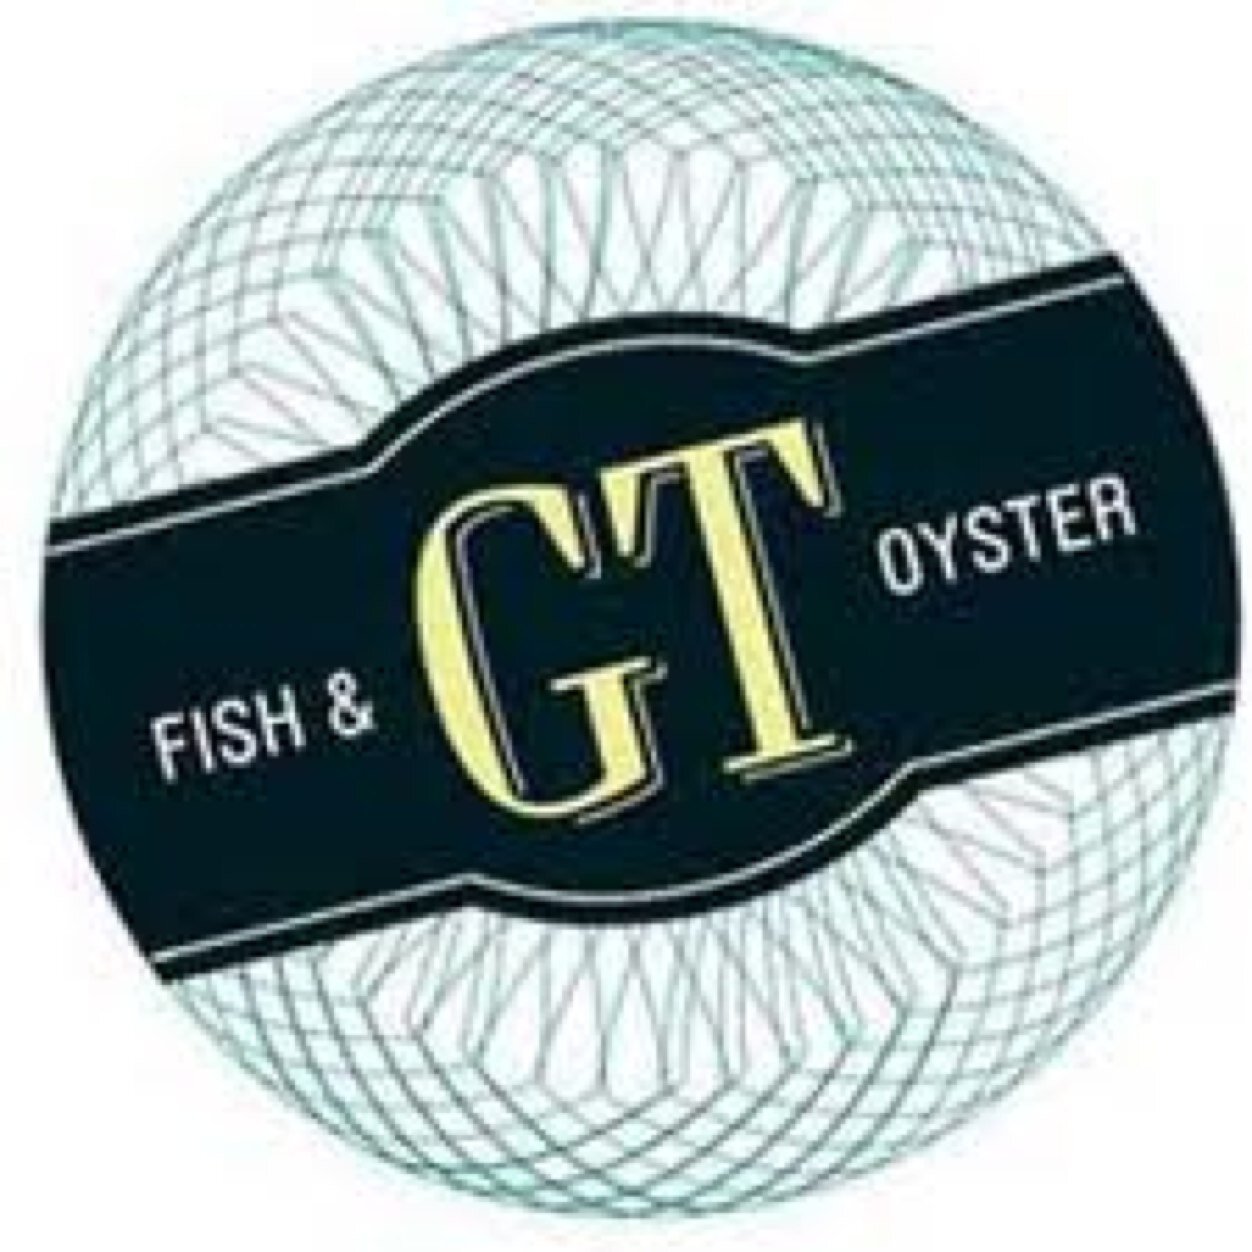 Seafood, dinner & brunch featuring an oyster bar & happy hour. Helmed by Chef Giuseppe Tentori.